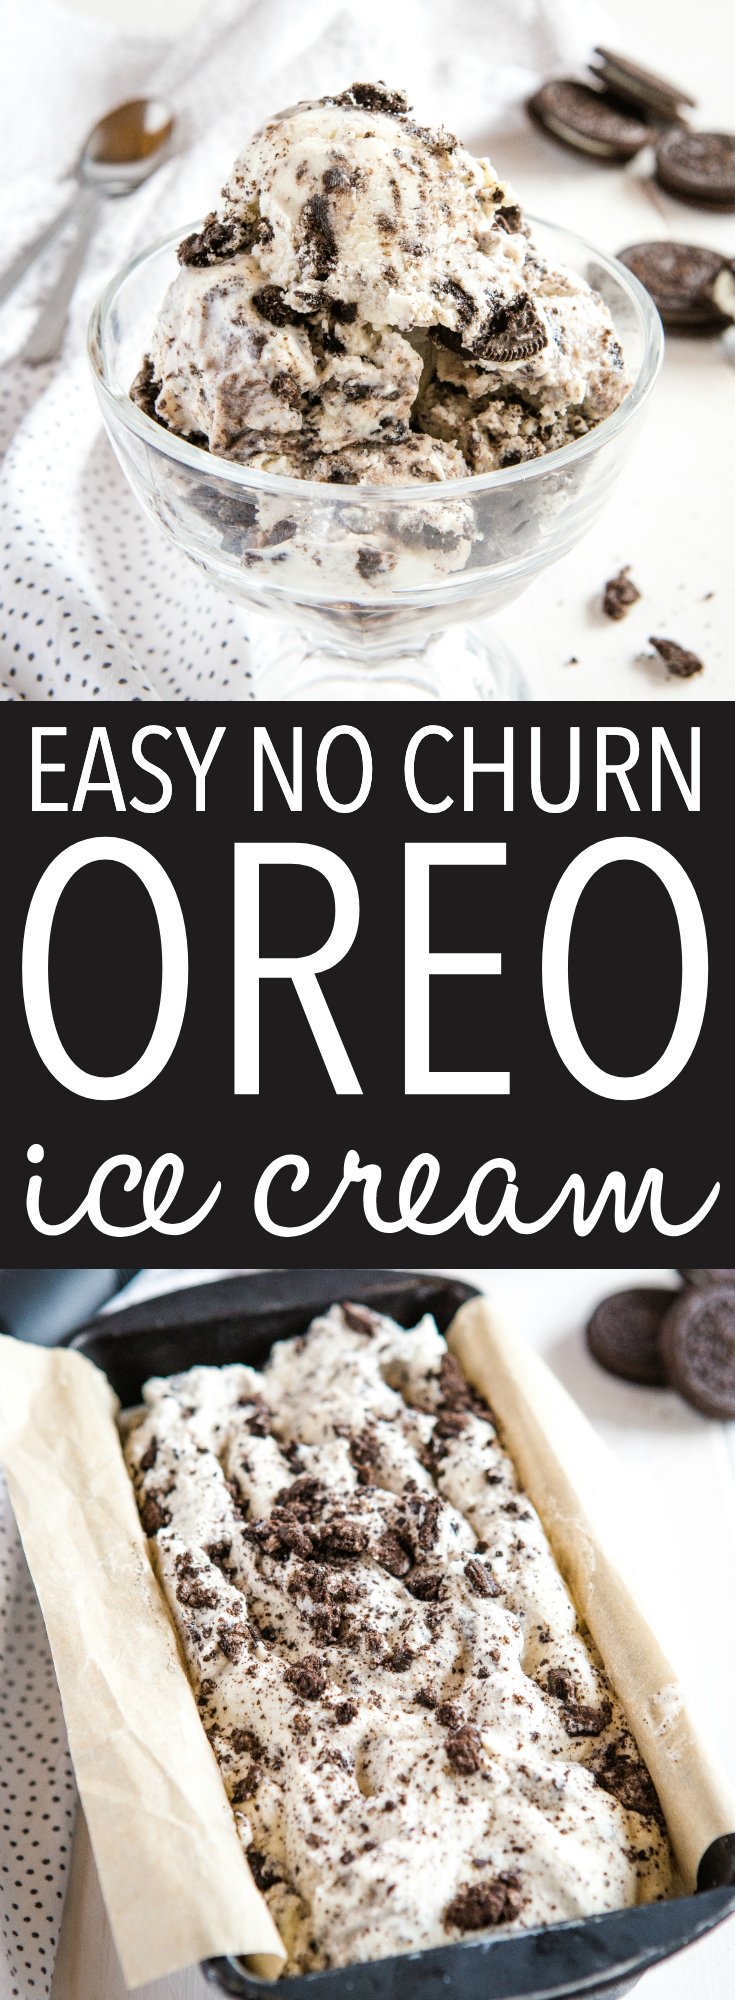 This Easy No Churn Cookies and Cream Oreo Ice Cream is the perfect homemade ice cream for Oreo lovers! It's simple to make with only 3 ingredients! Recipe from thebusybaker.ca! #icecream #oreo #cookiesandcream #nochurn #homemade #dessert #summer via @busybakerblog